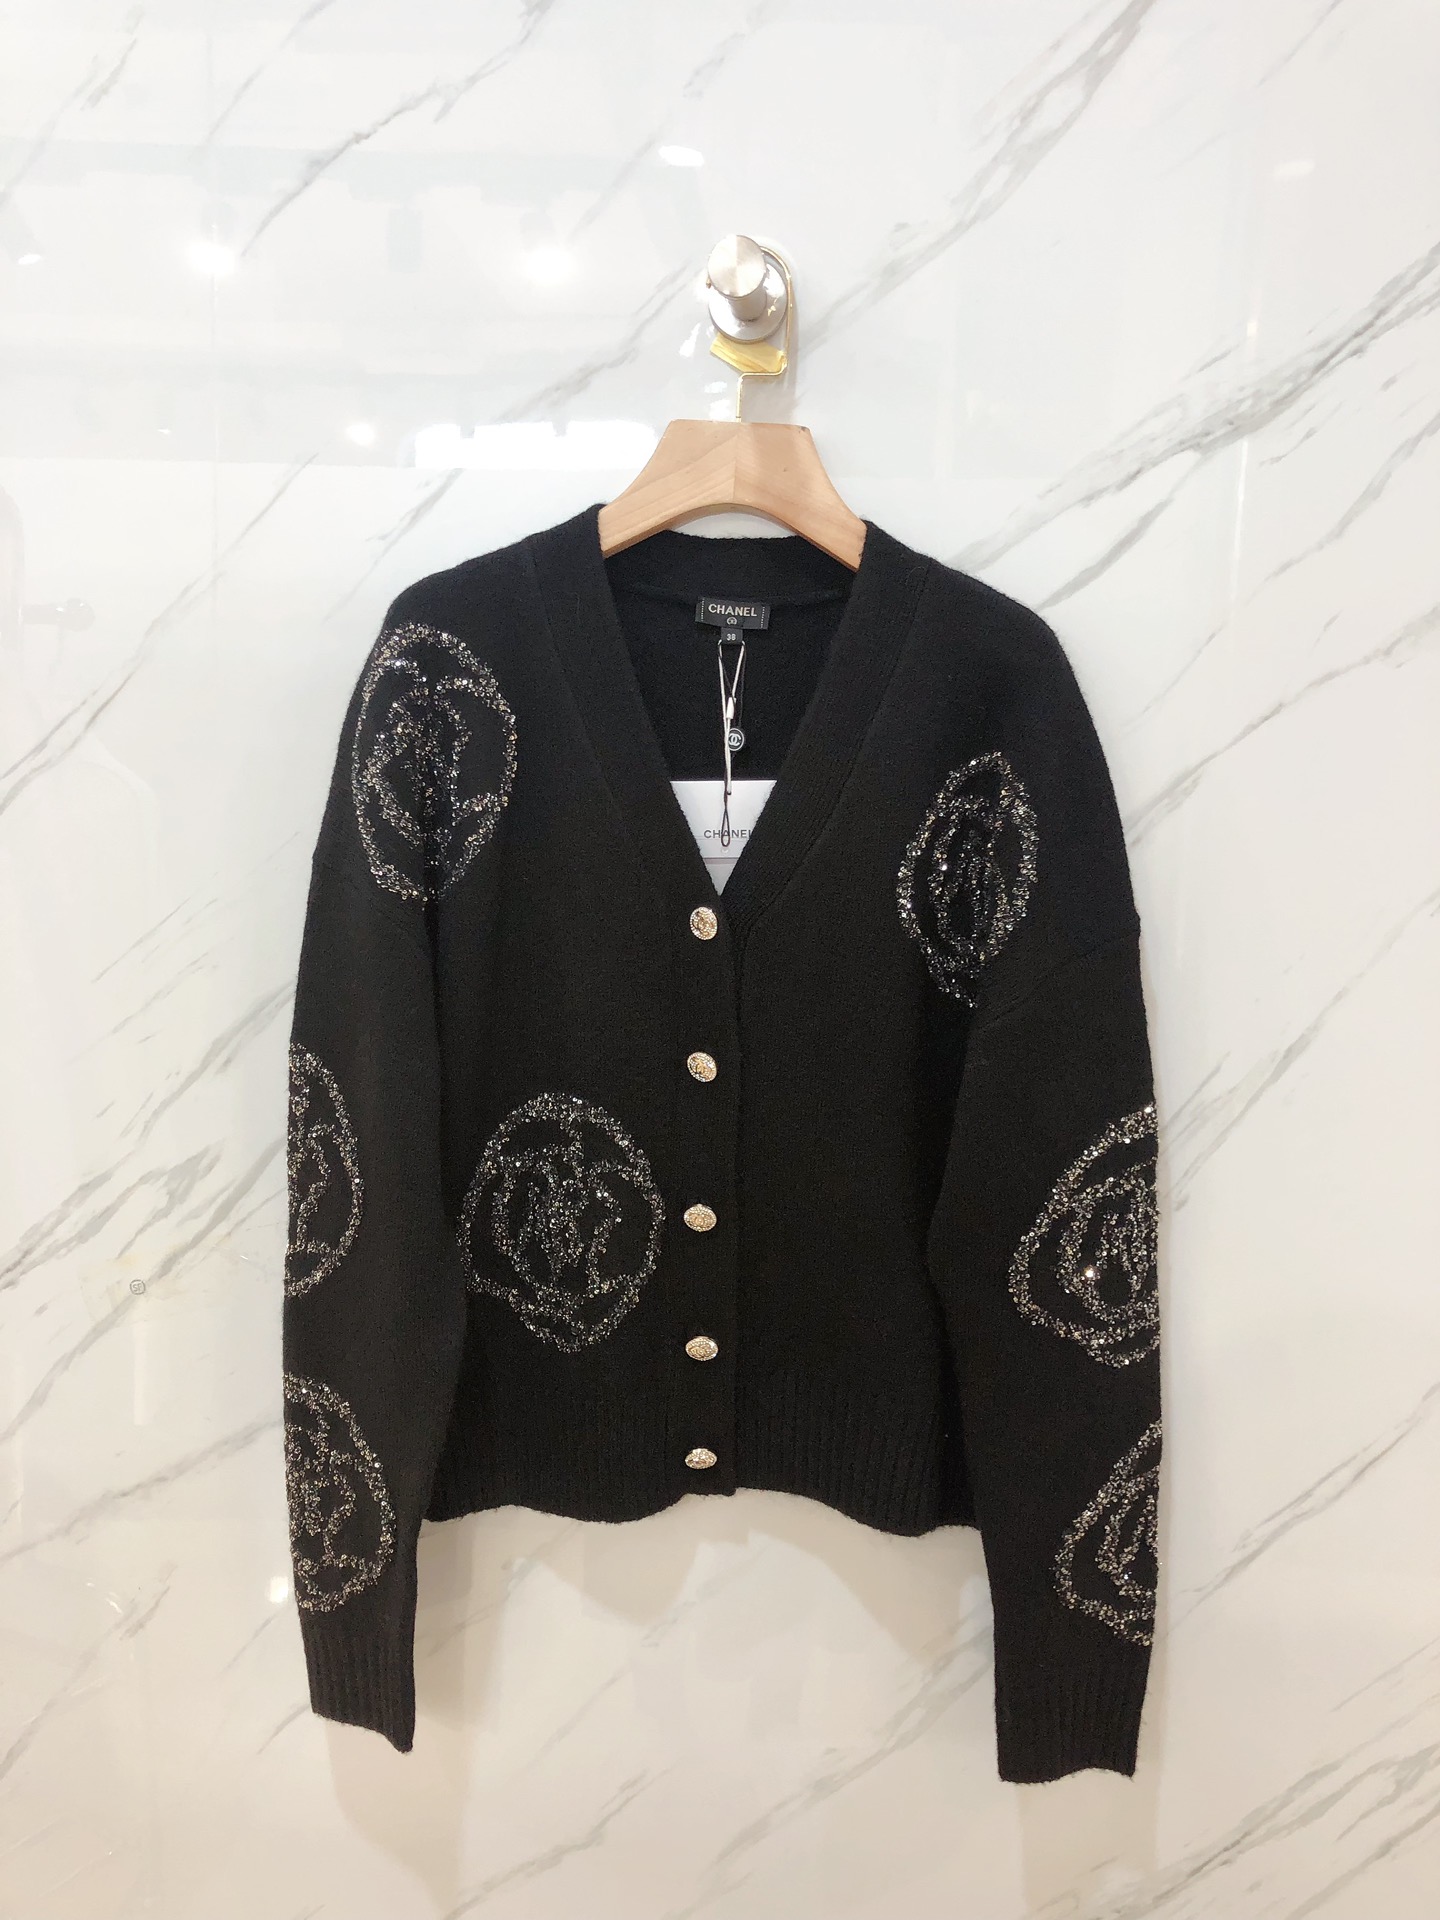 Chanel Clothing Cardigans Knit Sweater Sweatshirts Knitting Fall/Winter Collection